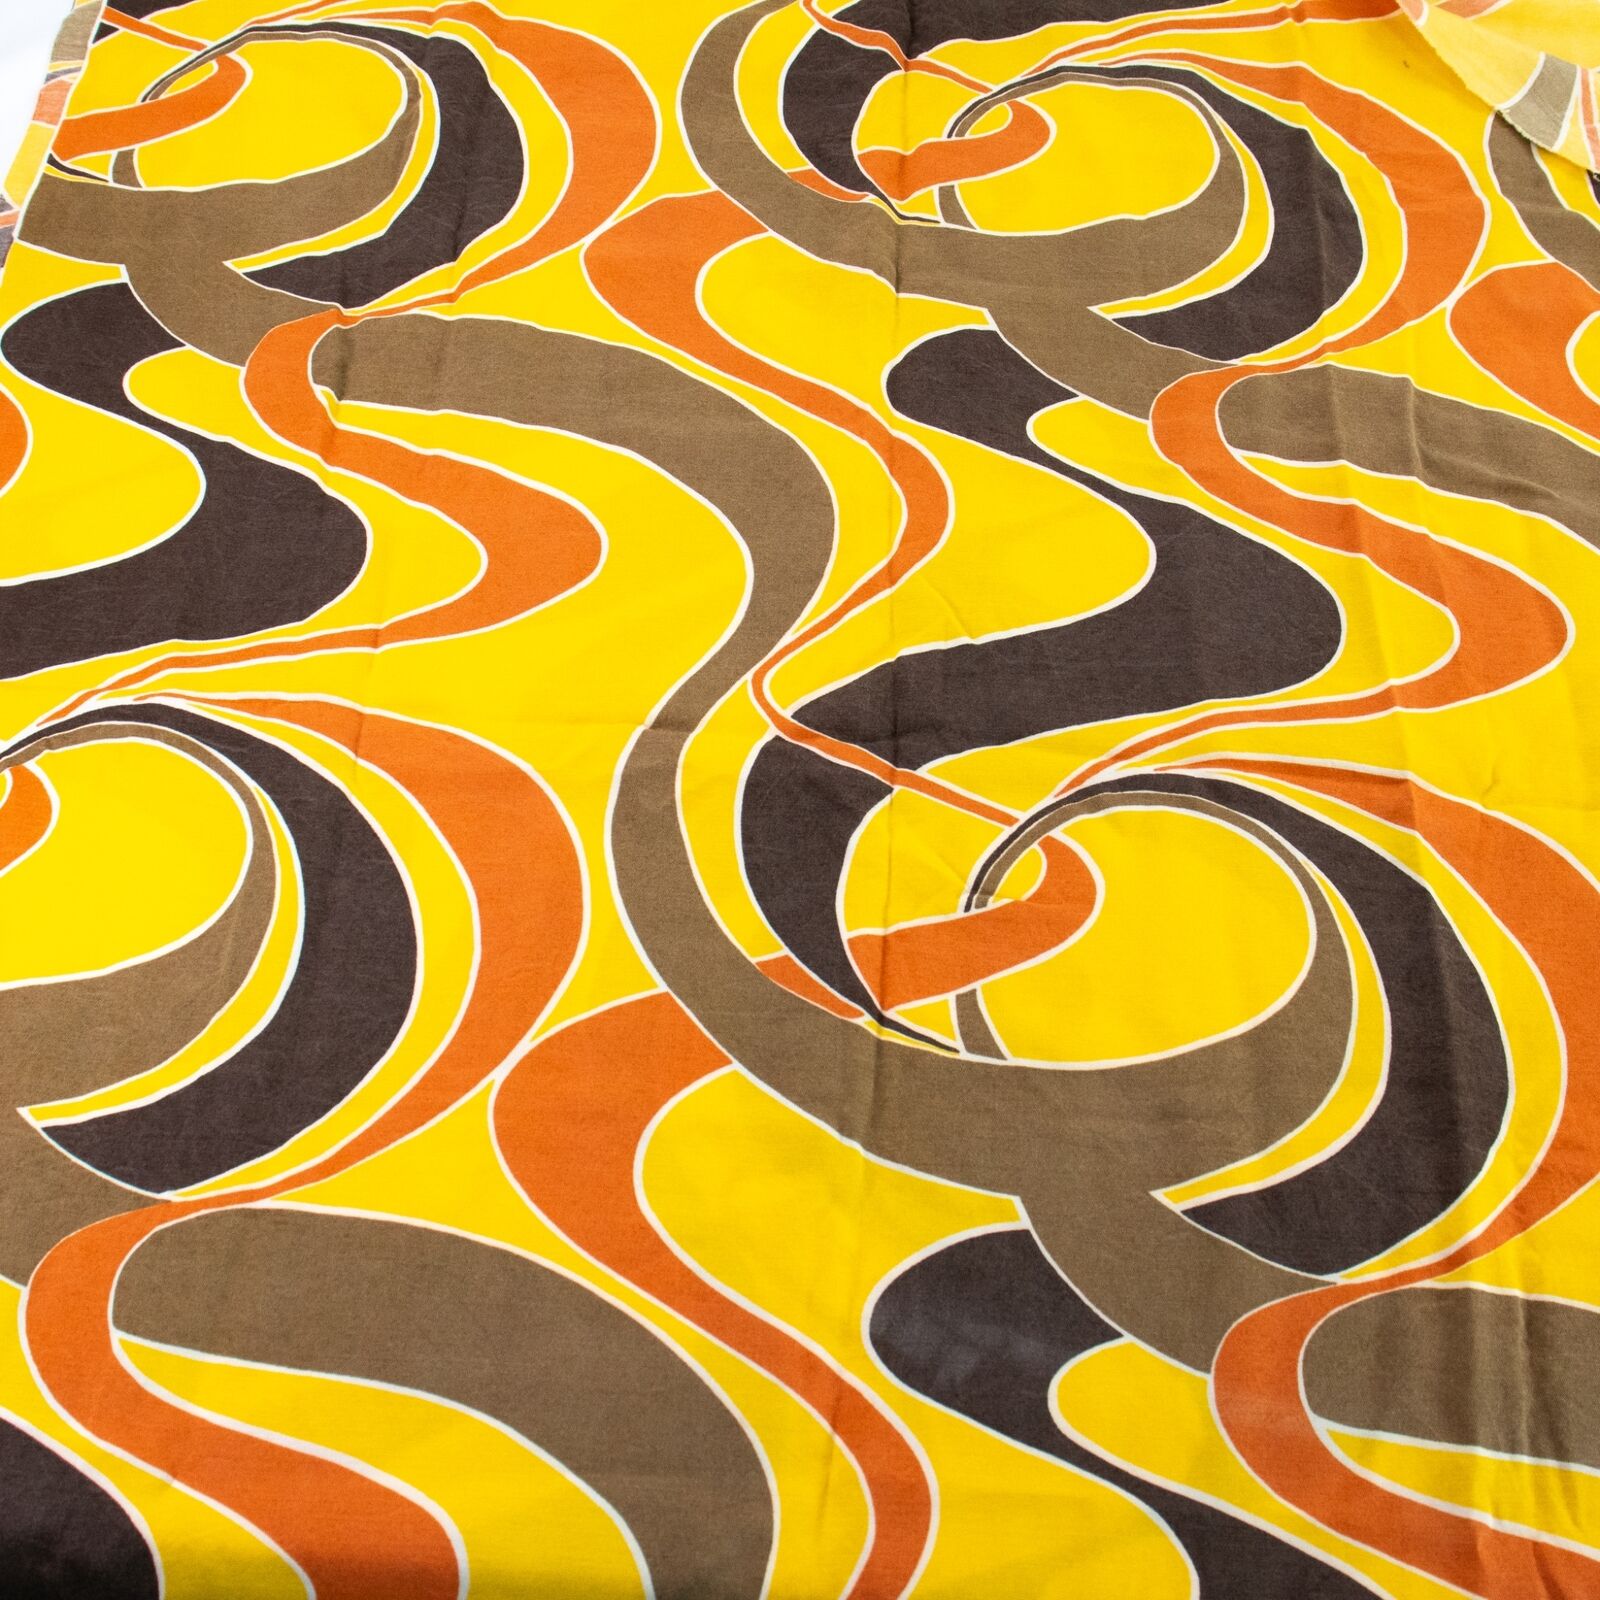 Vtg Mod Groovy Fabric 1970s Psychedelic Large Brown Yellow Swirls Drapery 42x103